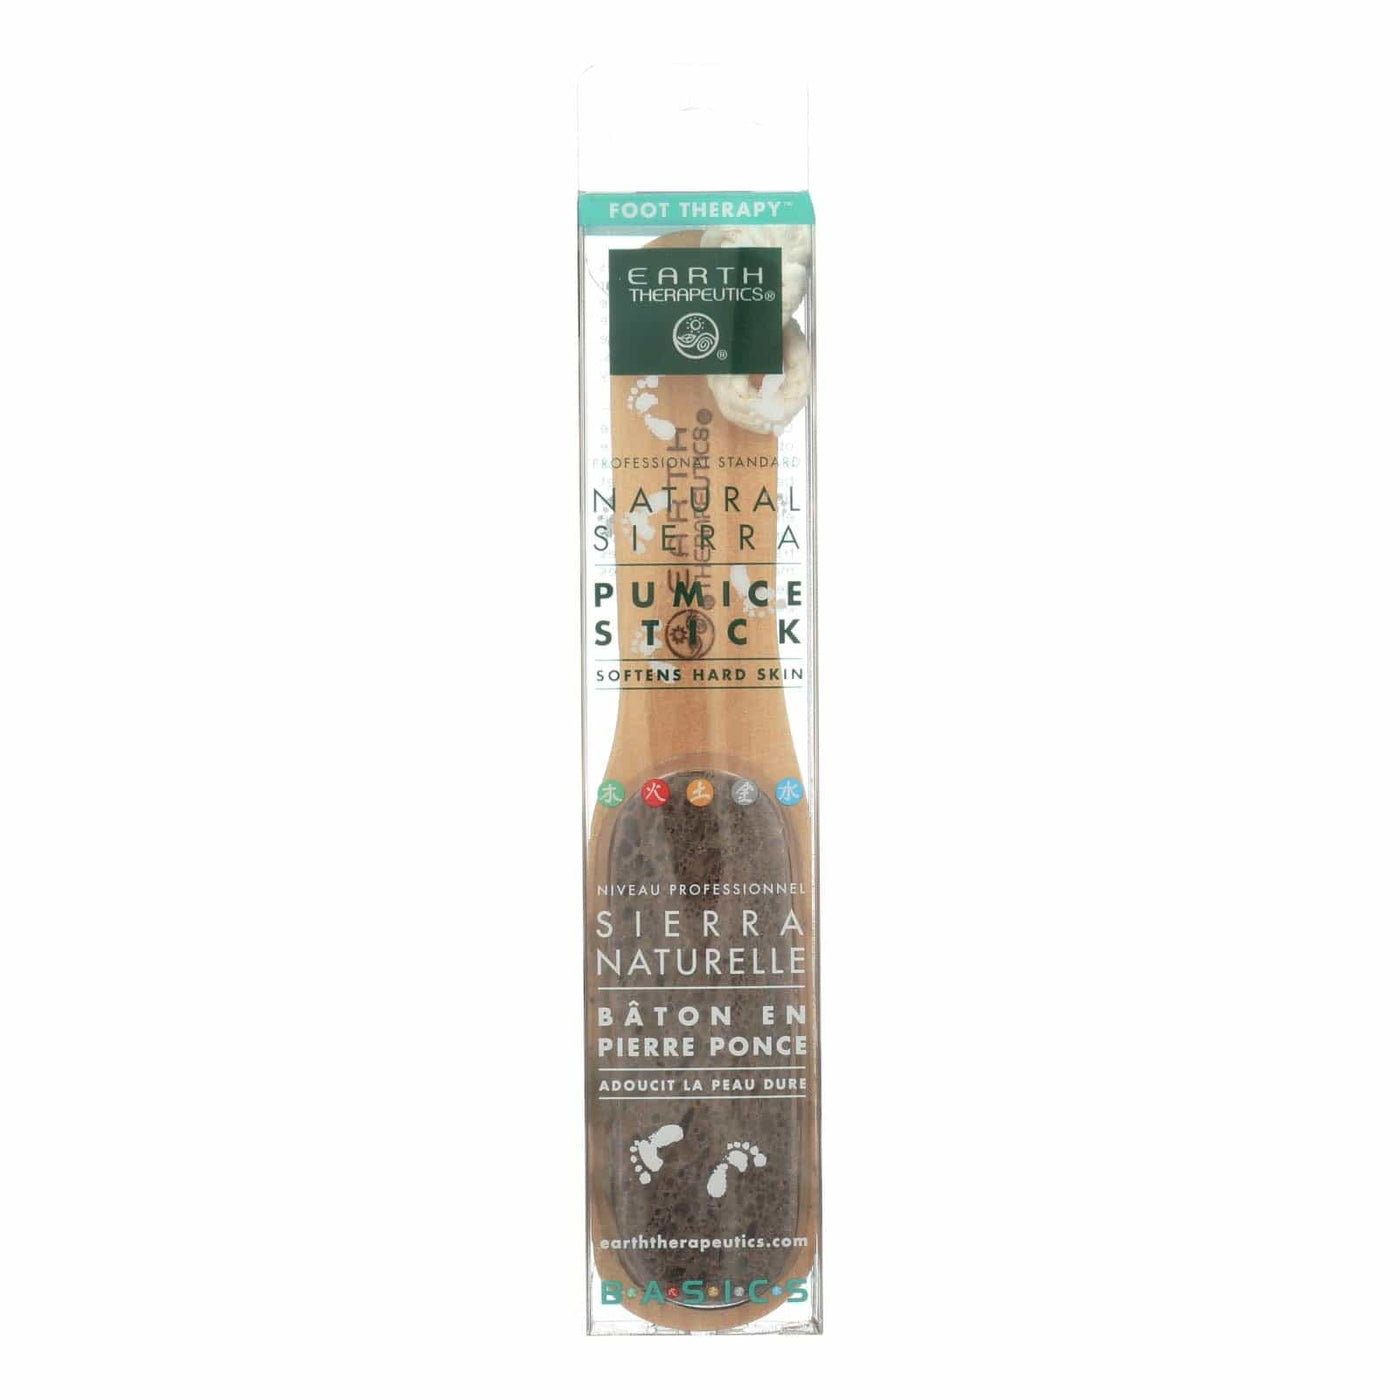 Earth Therapeutics Natural Sierra Pumice Stick - 1 Stick | OnlyNaturals.us